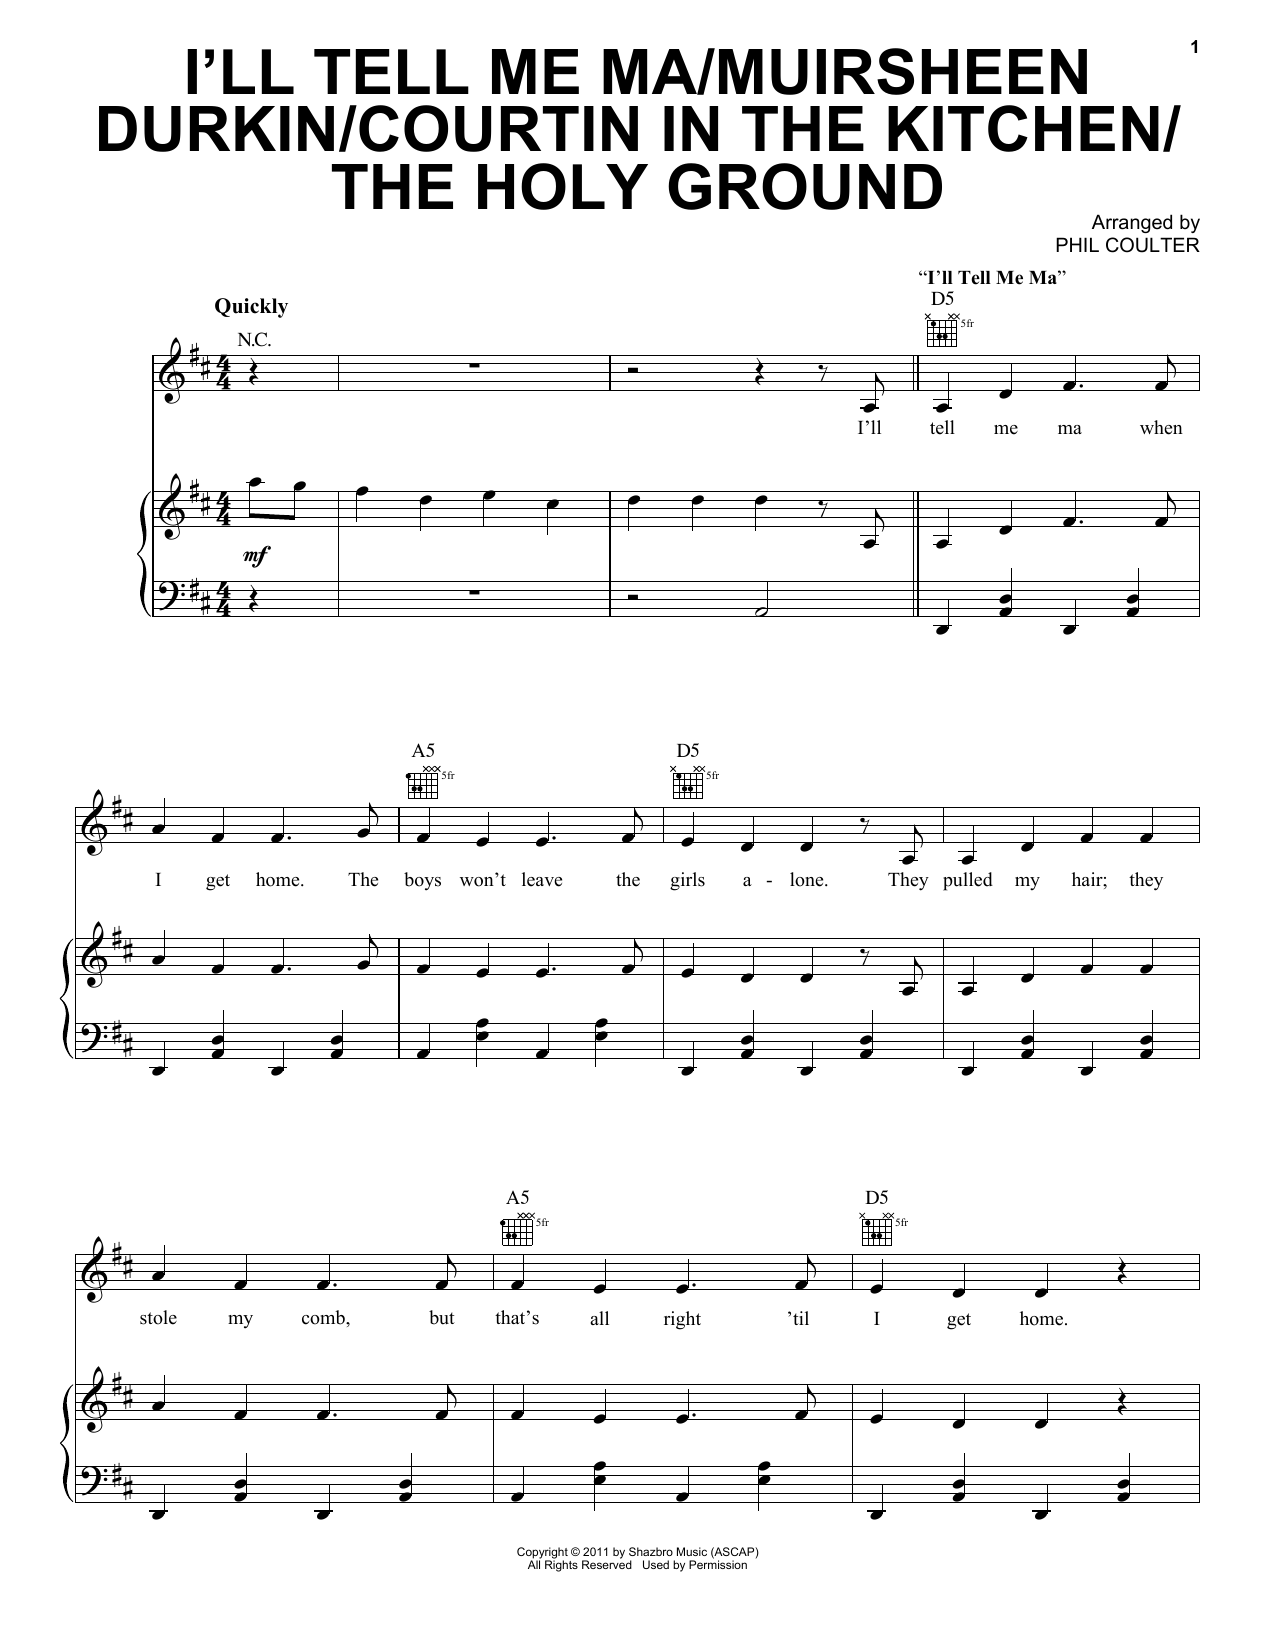 I'll Tell Me Ma/Muirsheen Durkin/Courtin In The Kitchen/The Holy Ground sheet music